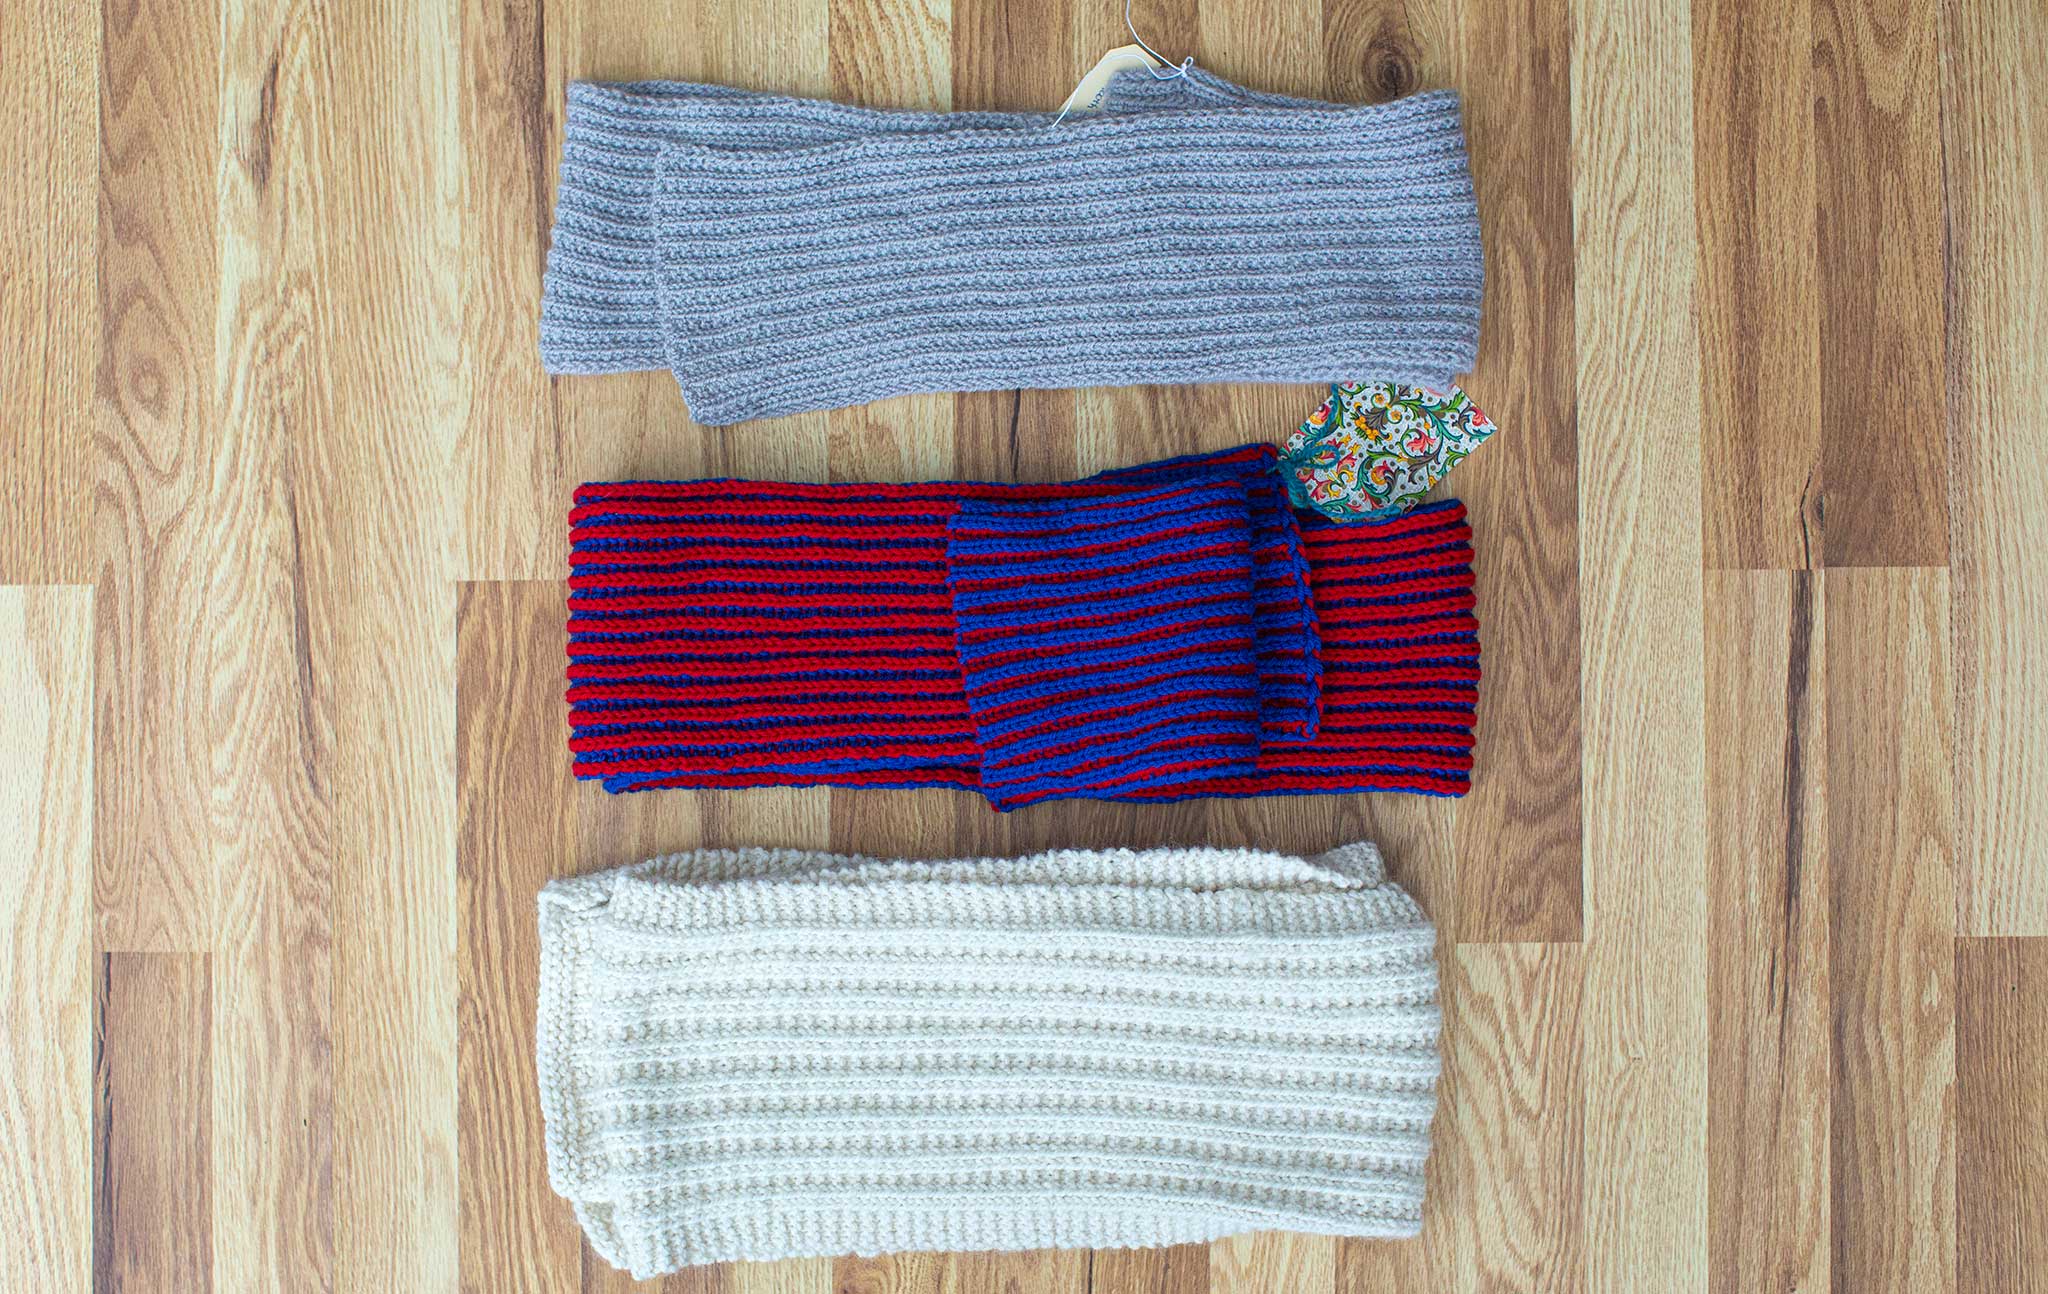 Three scarves ~ grey on top, blue/red in the middle, and white at the bottom.